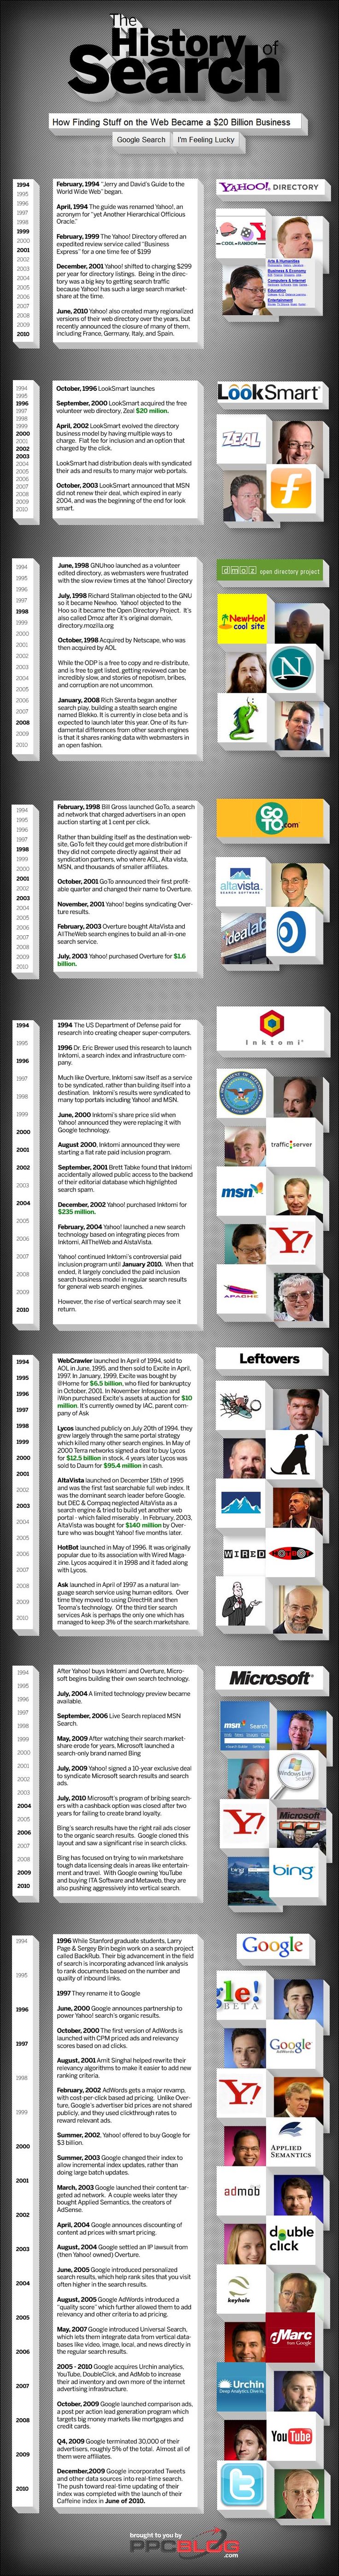 Advertising-Infographics-The-History-of-Search Advertising Infographics : The History of Search: How Finding Stuff on the Web Became a #20 Billion Busines...